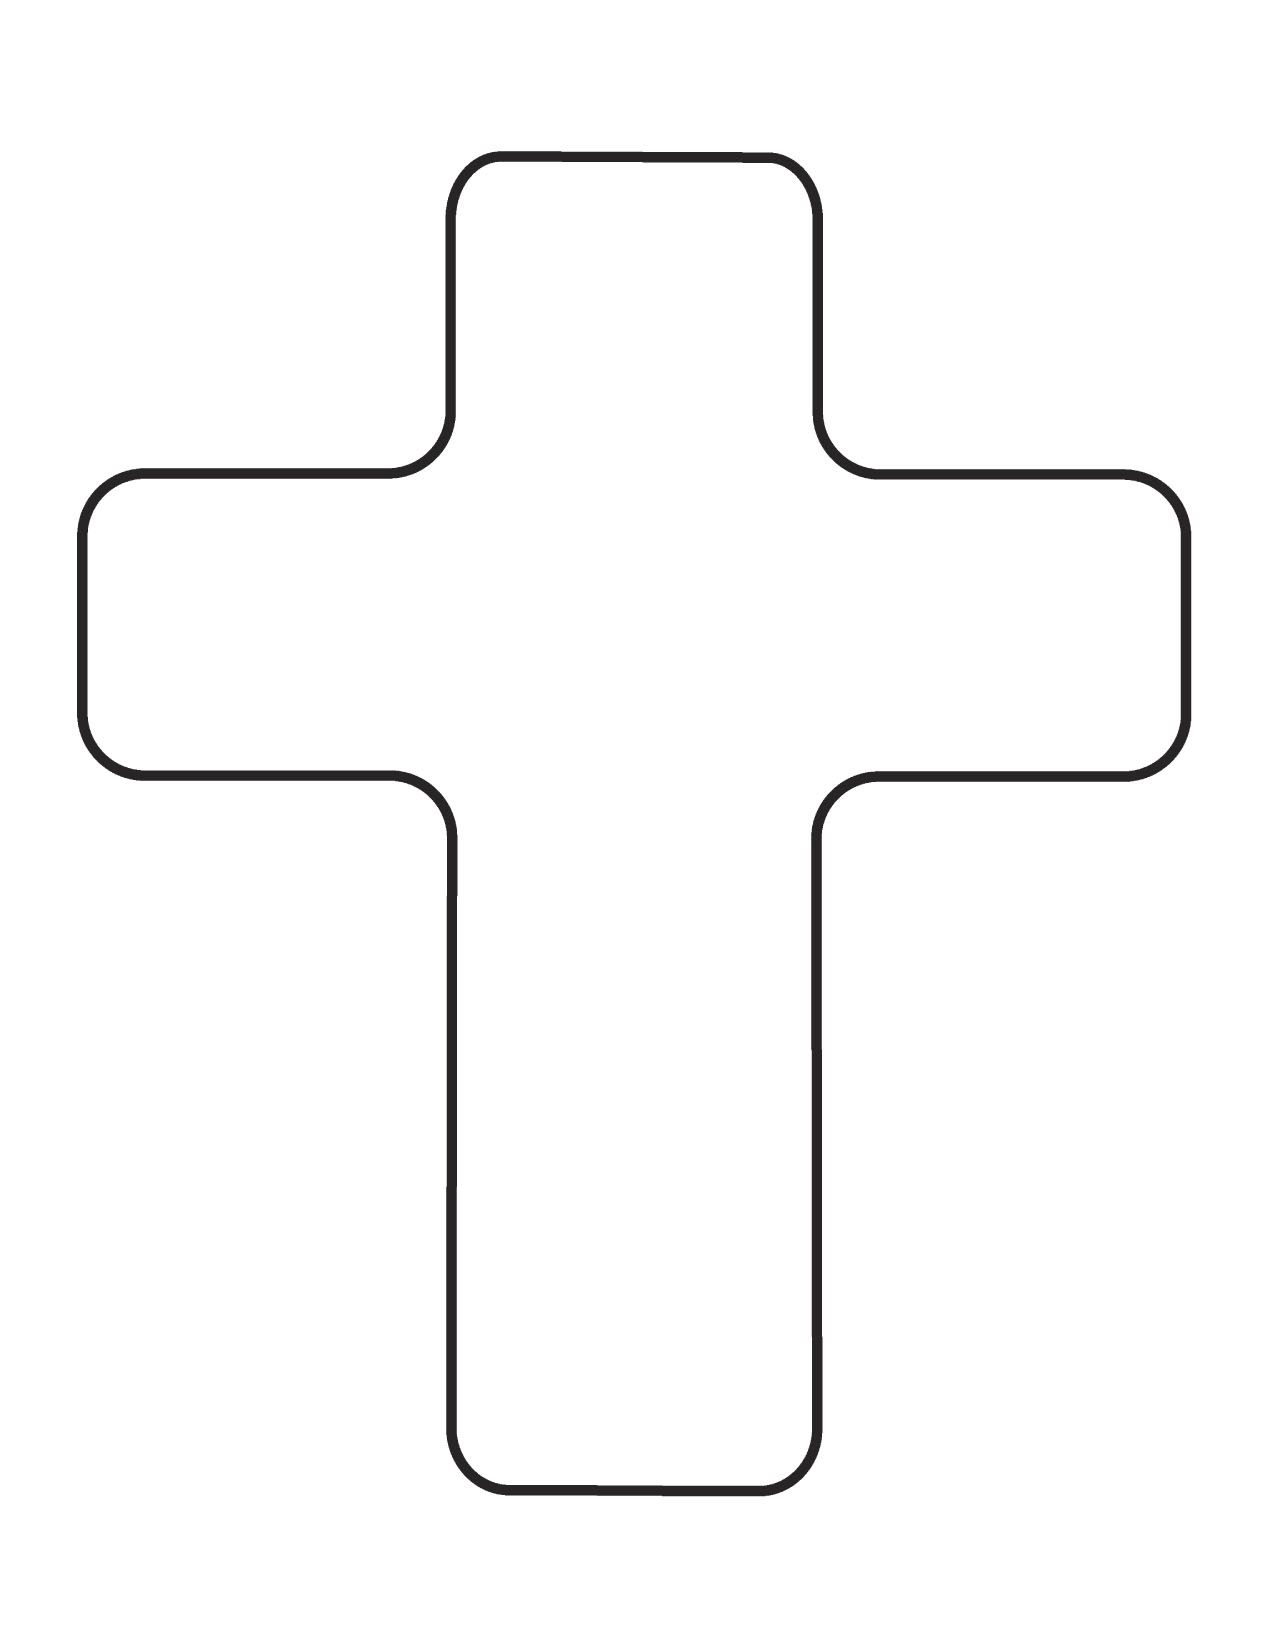 Black Christian Cross | Clipart library - Free Clipart Images